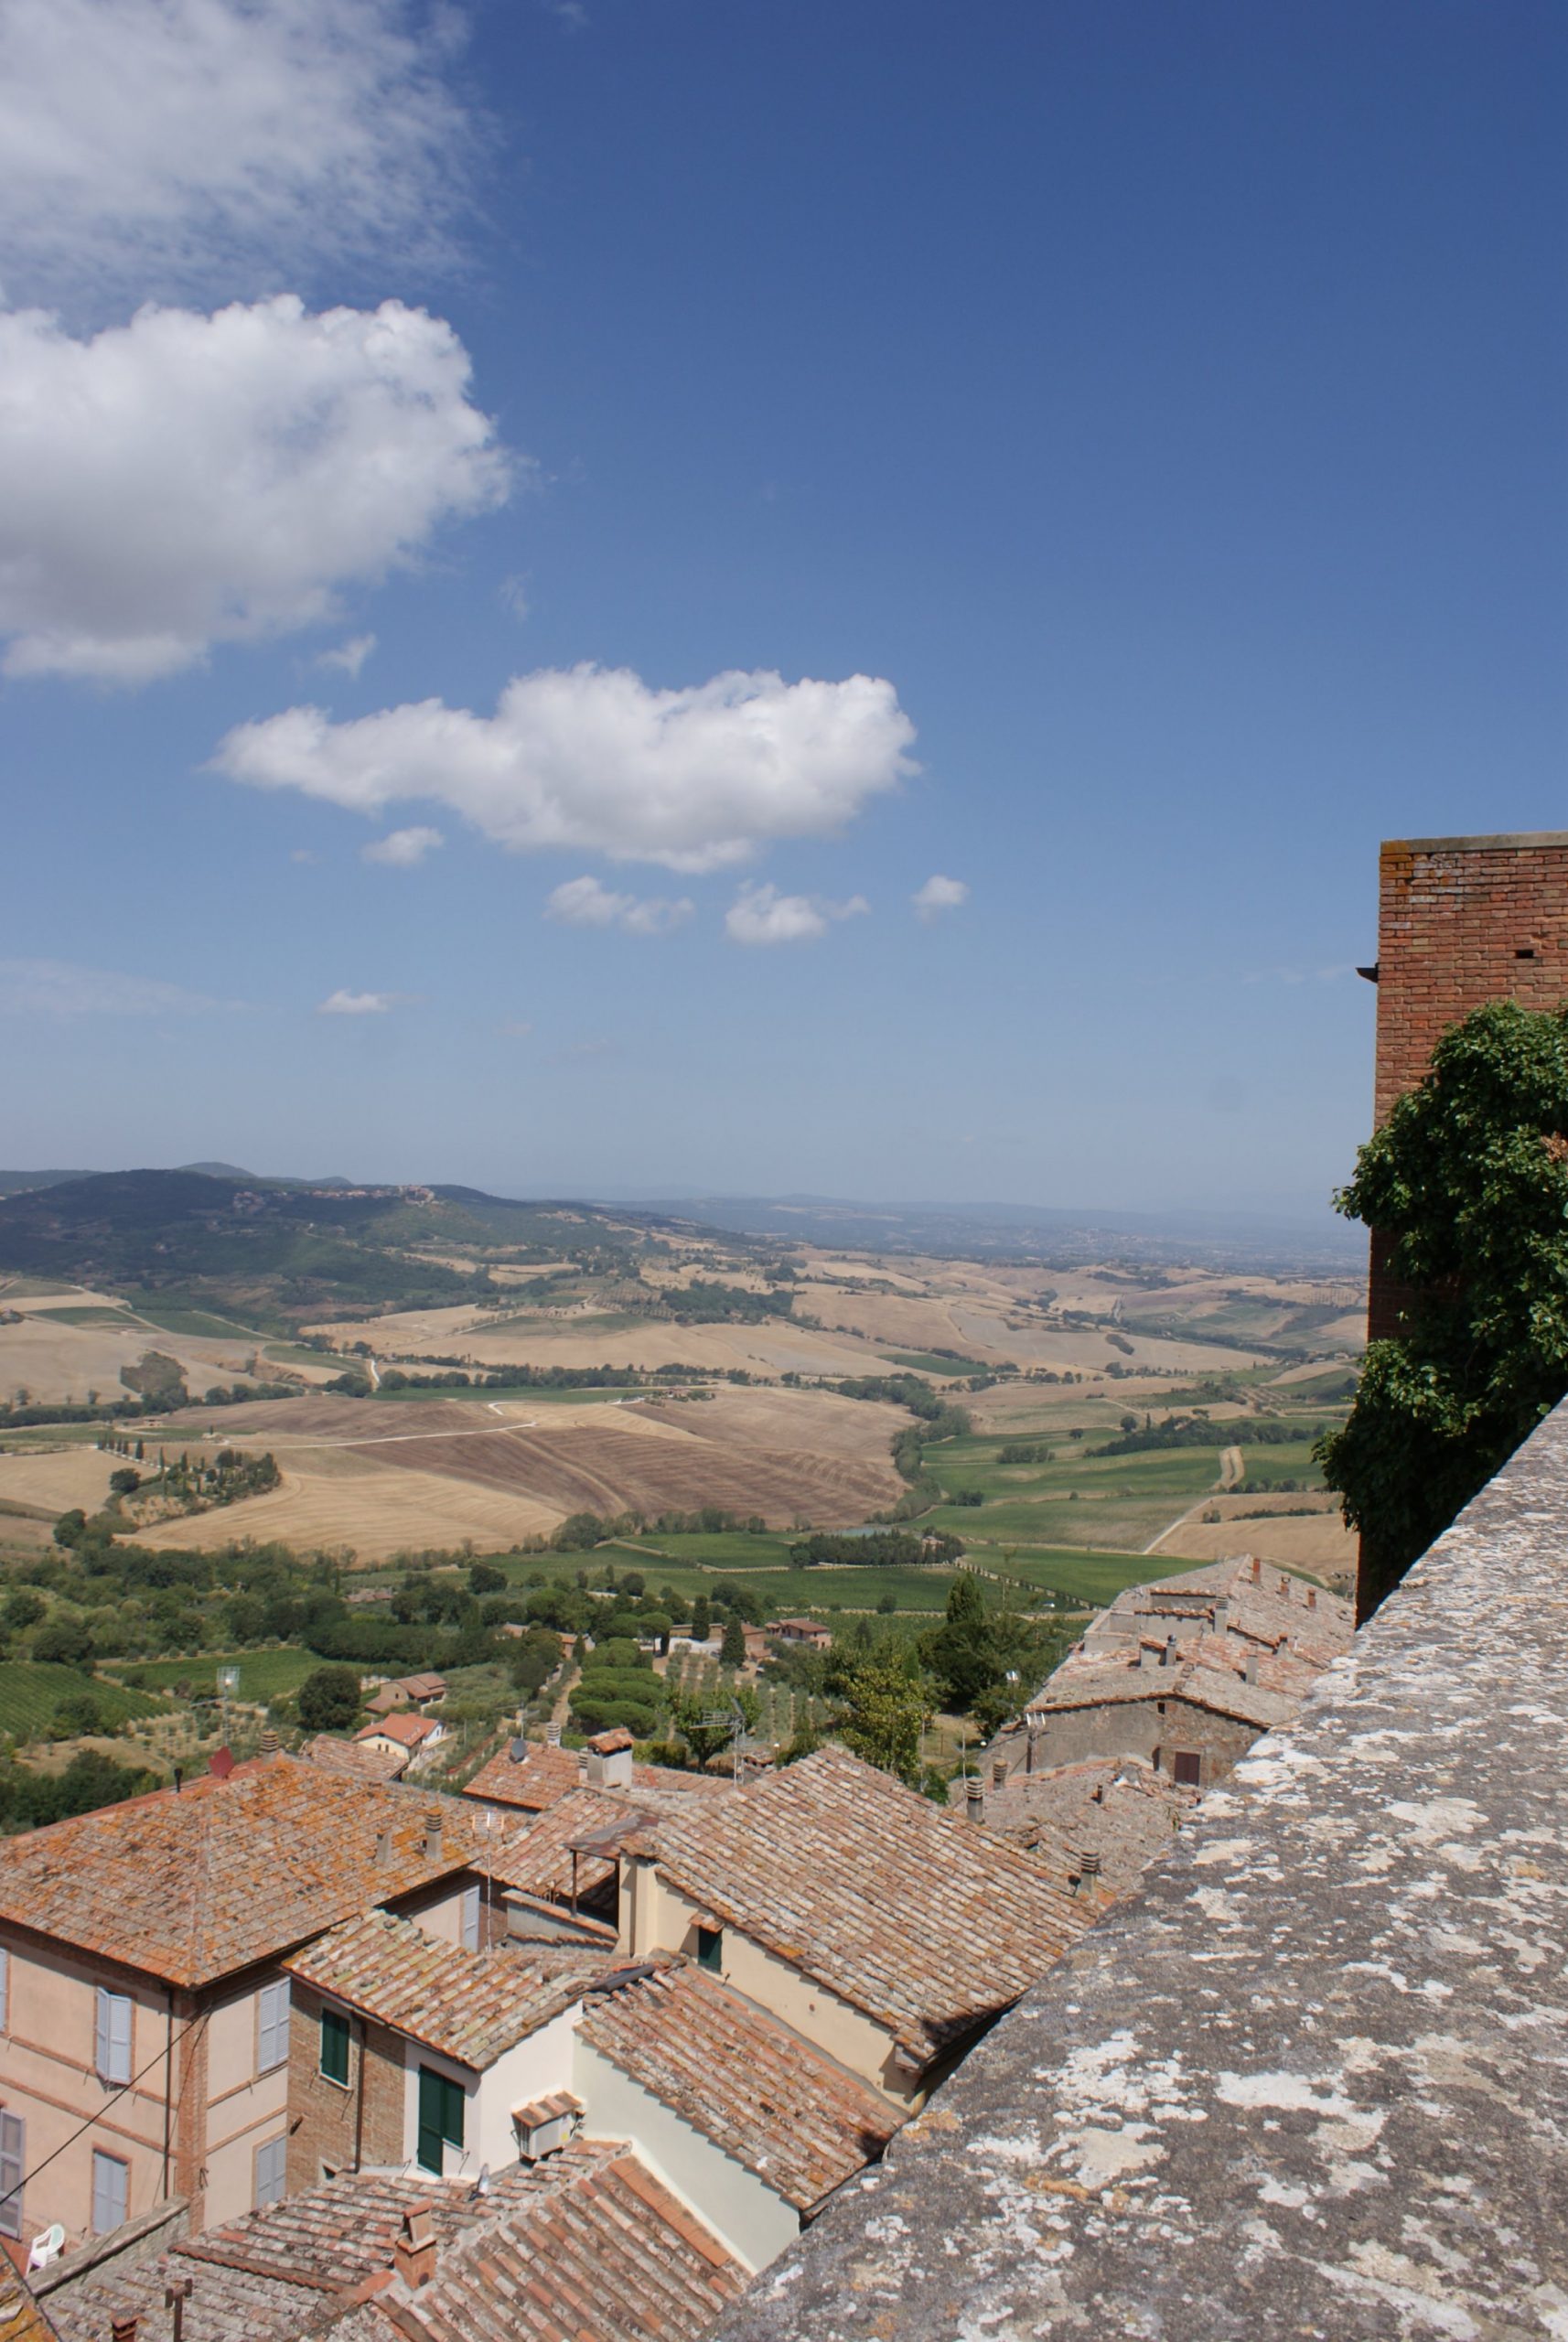 TRAVEL GUIDE: SLEEP, EAT, DO AND SEE IN A WEEK IN TUSCANY AND UMBRIA (ITALY)